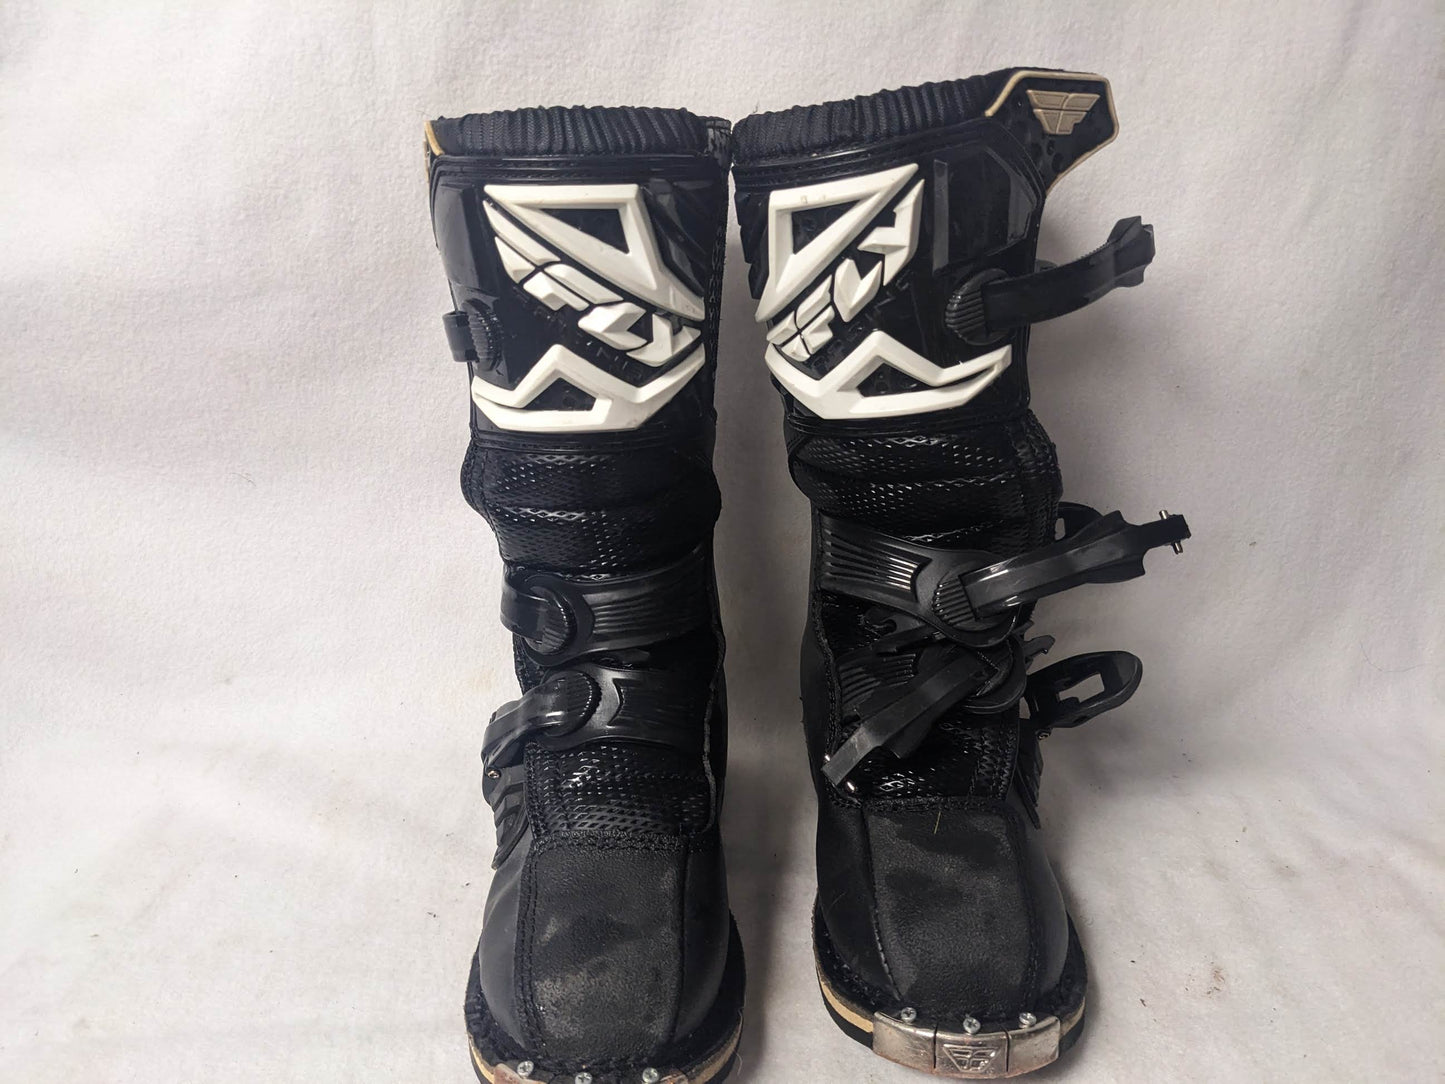 Fly Maverik Mini Youth MX Motocross Boots Size 3 Color Black Condition Used